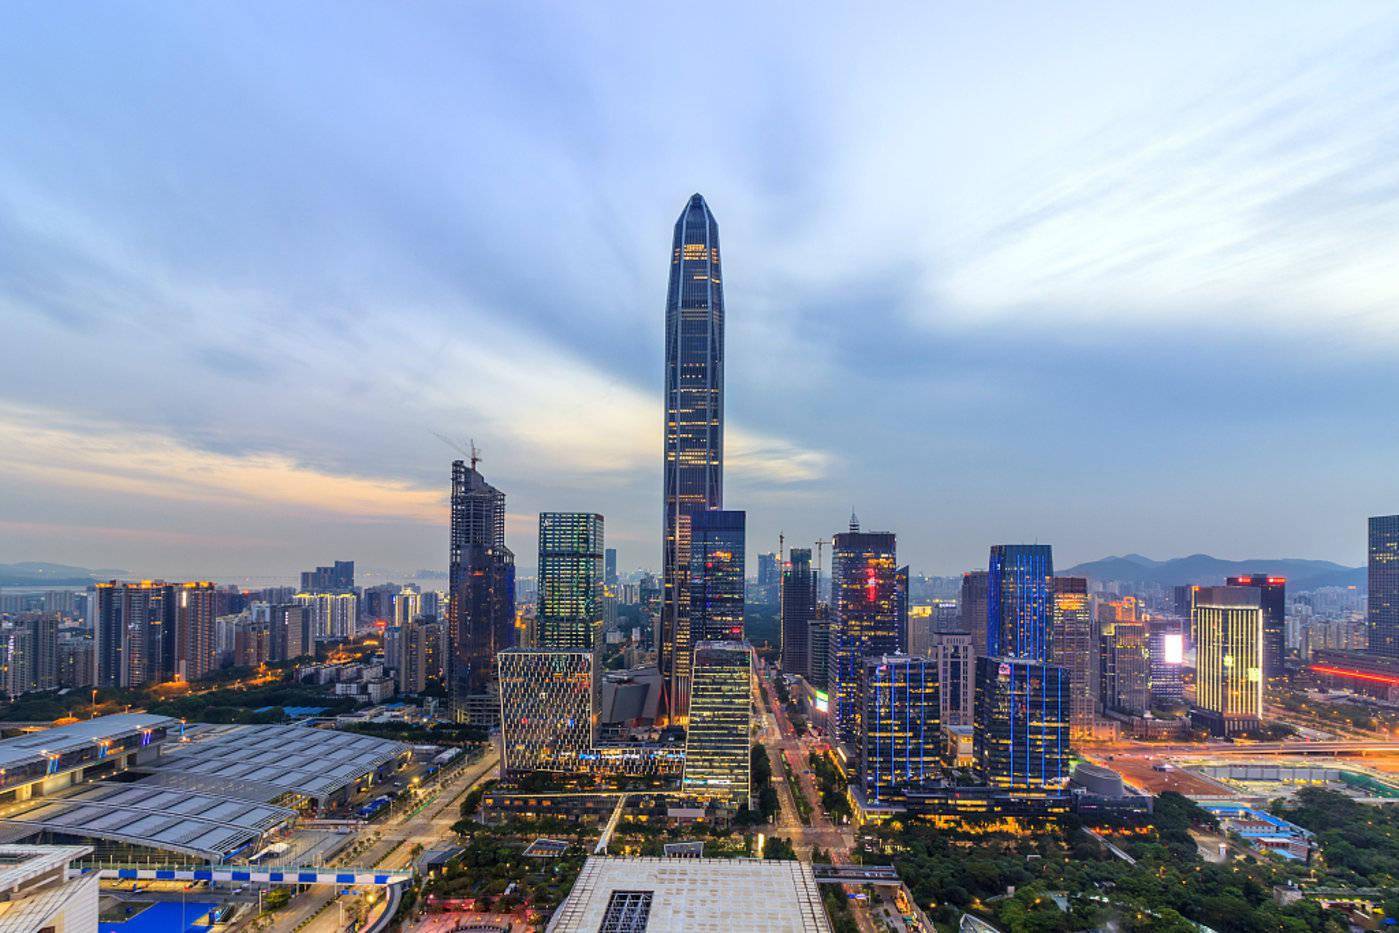  Shenzhen Back to Normal After Covid-19 Resurgence Ebbs